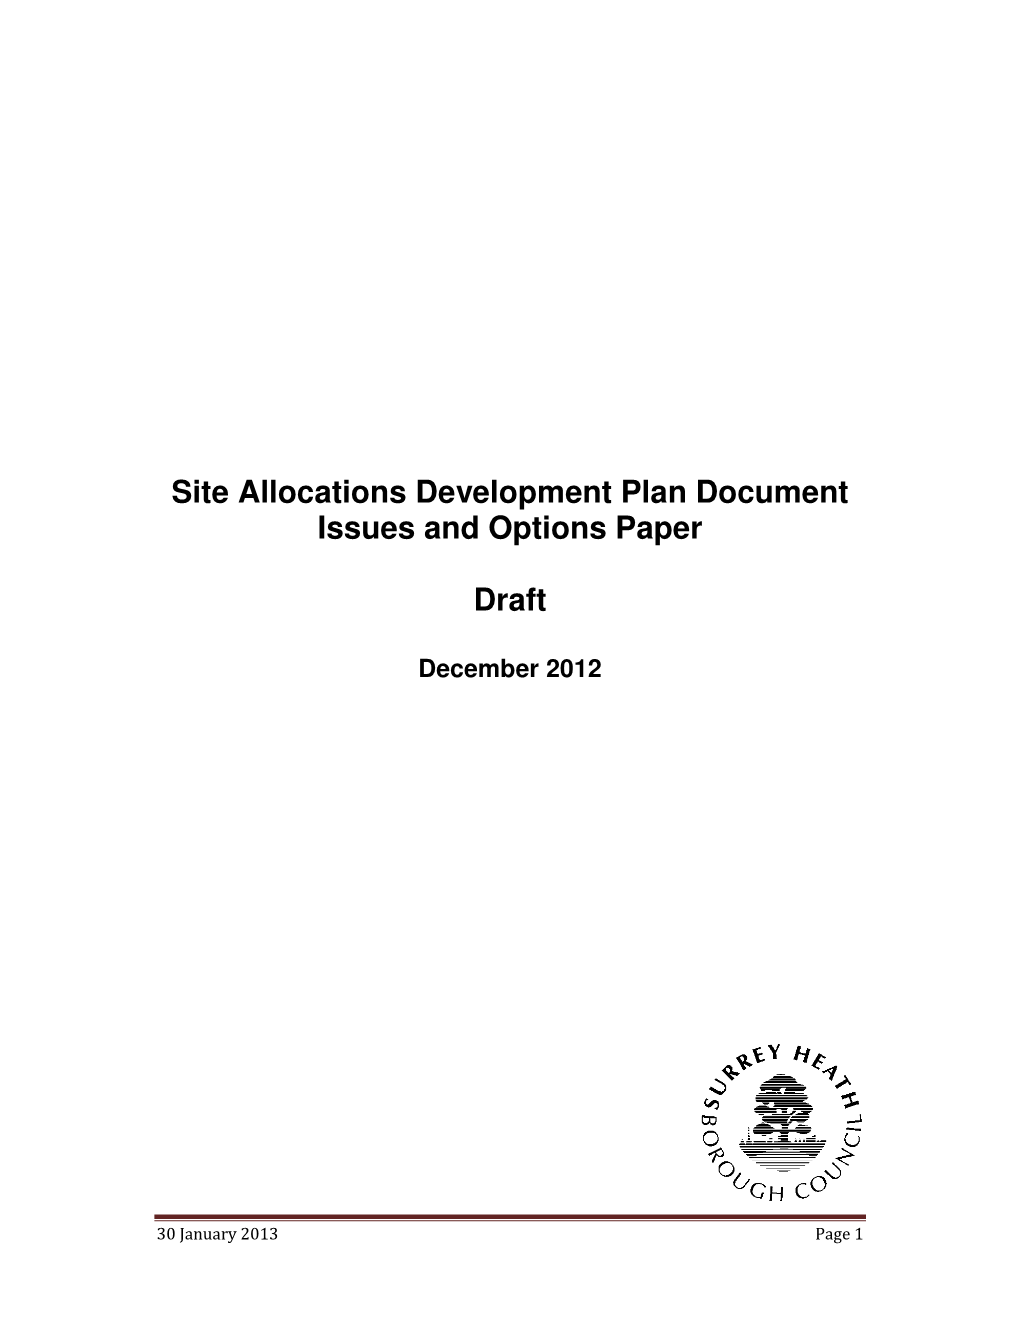 Site Allocations Development Plan Document Issues and Options Paper